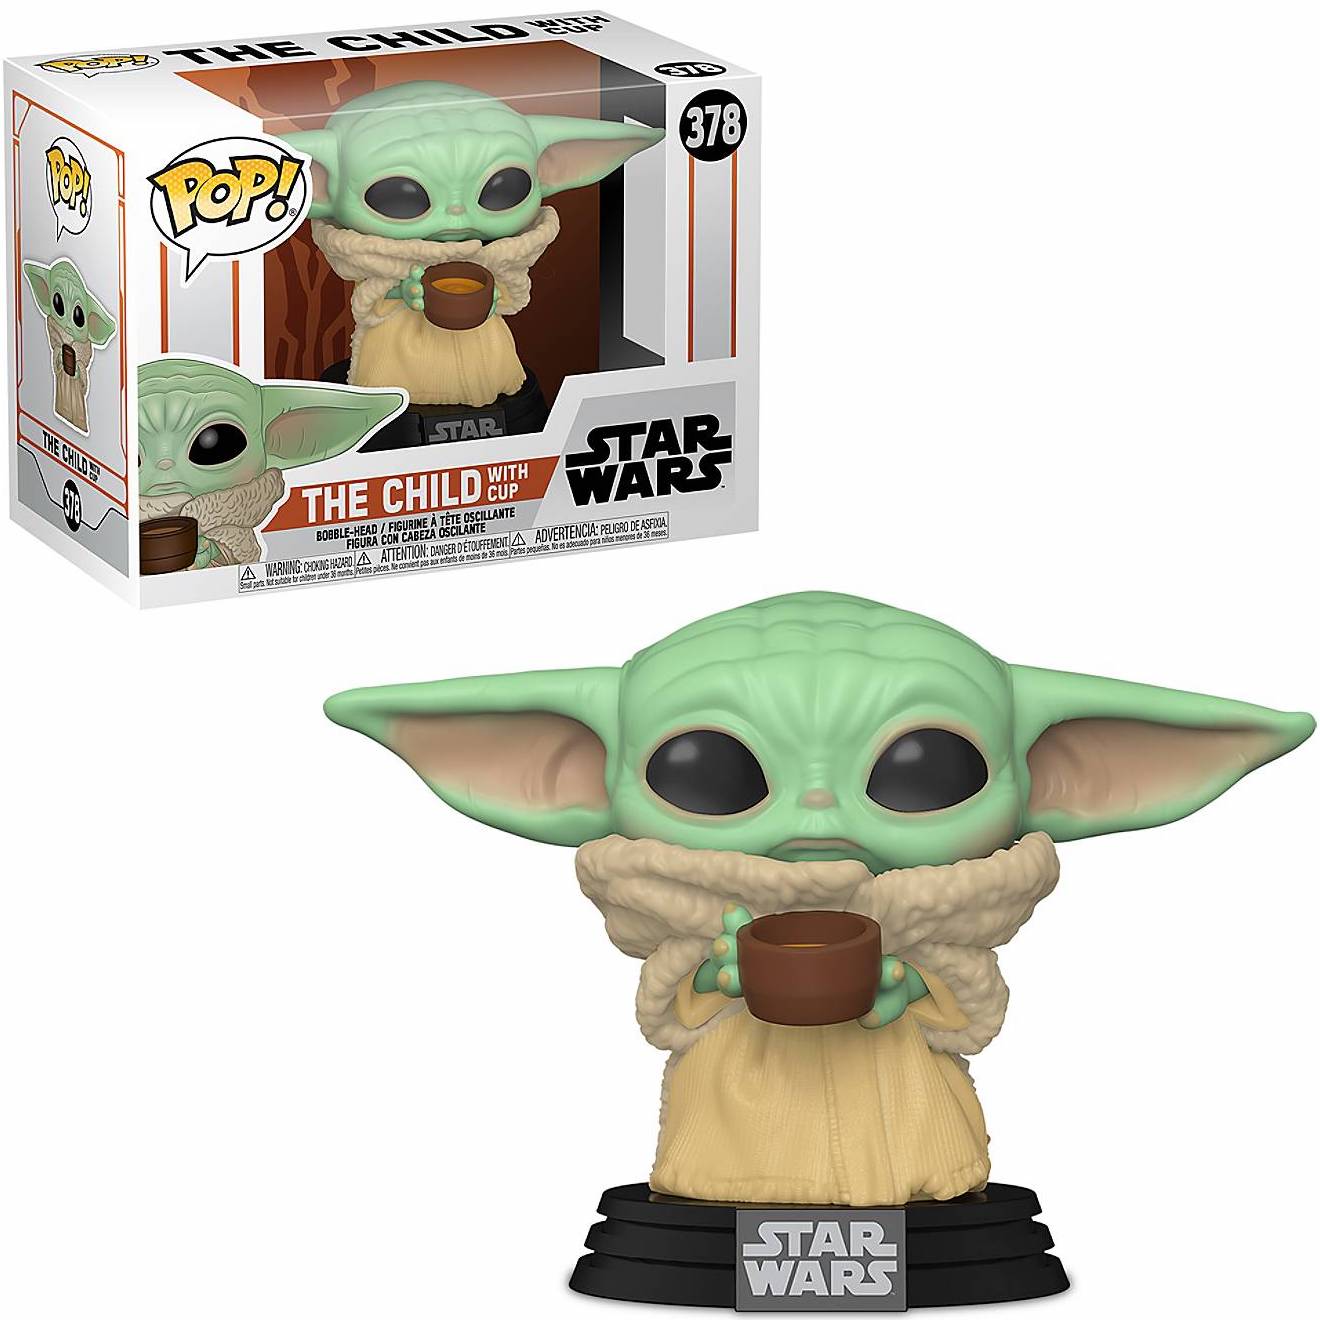 Star Wars: The Mandalorian The Child with Frog Pop! Vinyl Figure